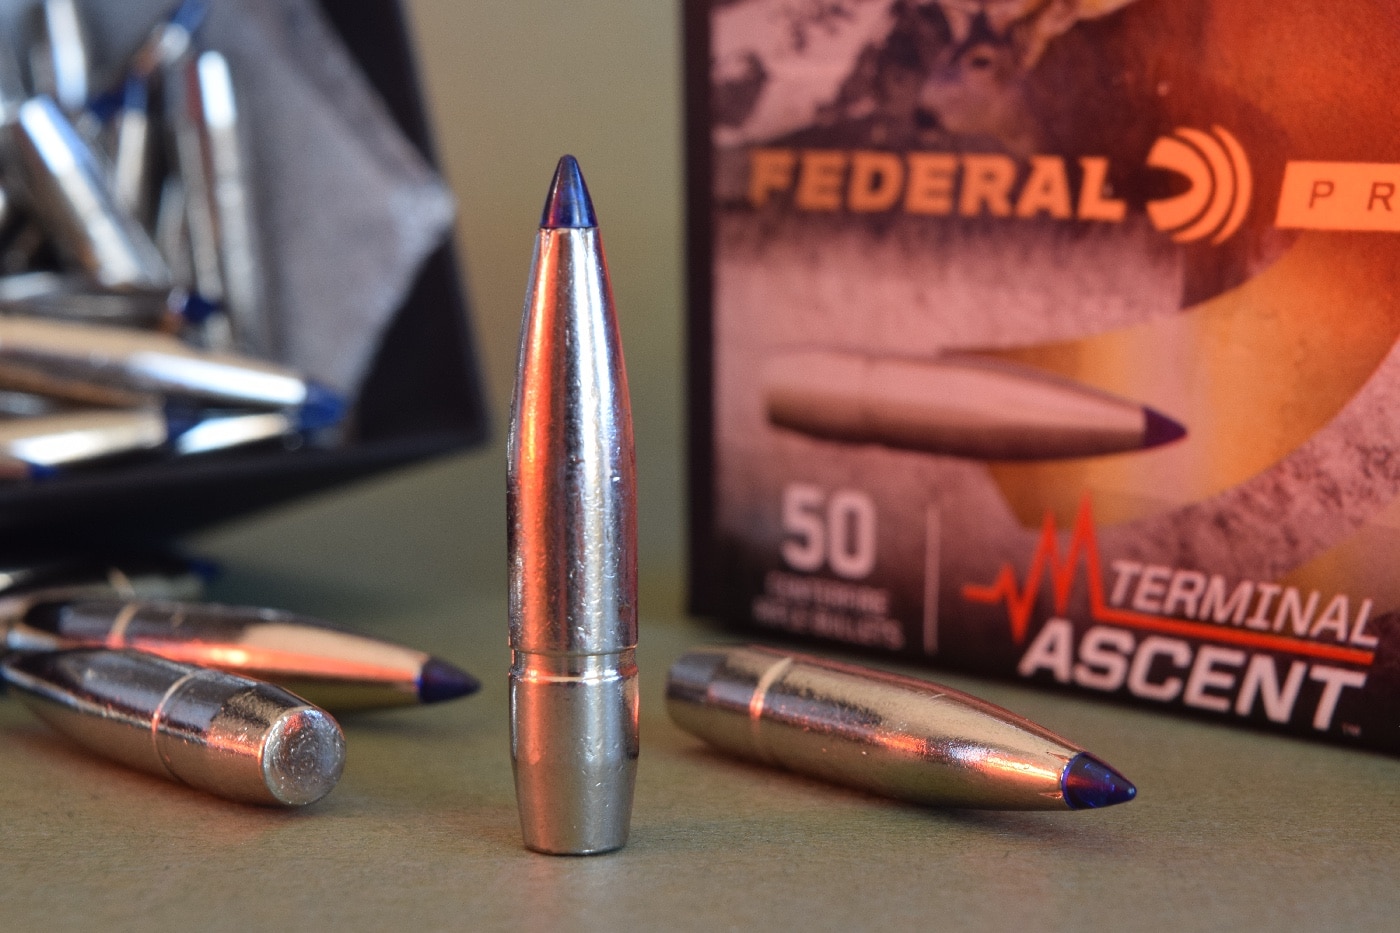 In this photograph, the author shows us the Terminal Ascent bullet. This is a rifle bullet that is a jacketed hollow point with a polymer tip favored by many deer hunters. It eliminates any feeding issues with hollow points while improving the ballistic coefficient of the projectile.